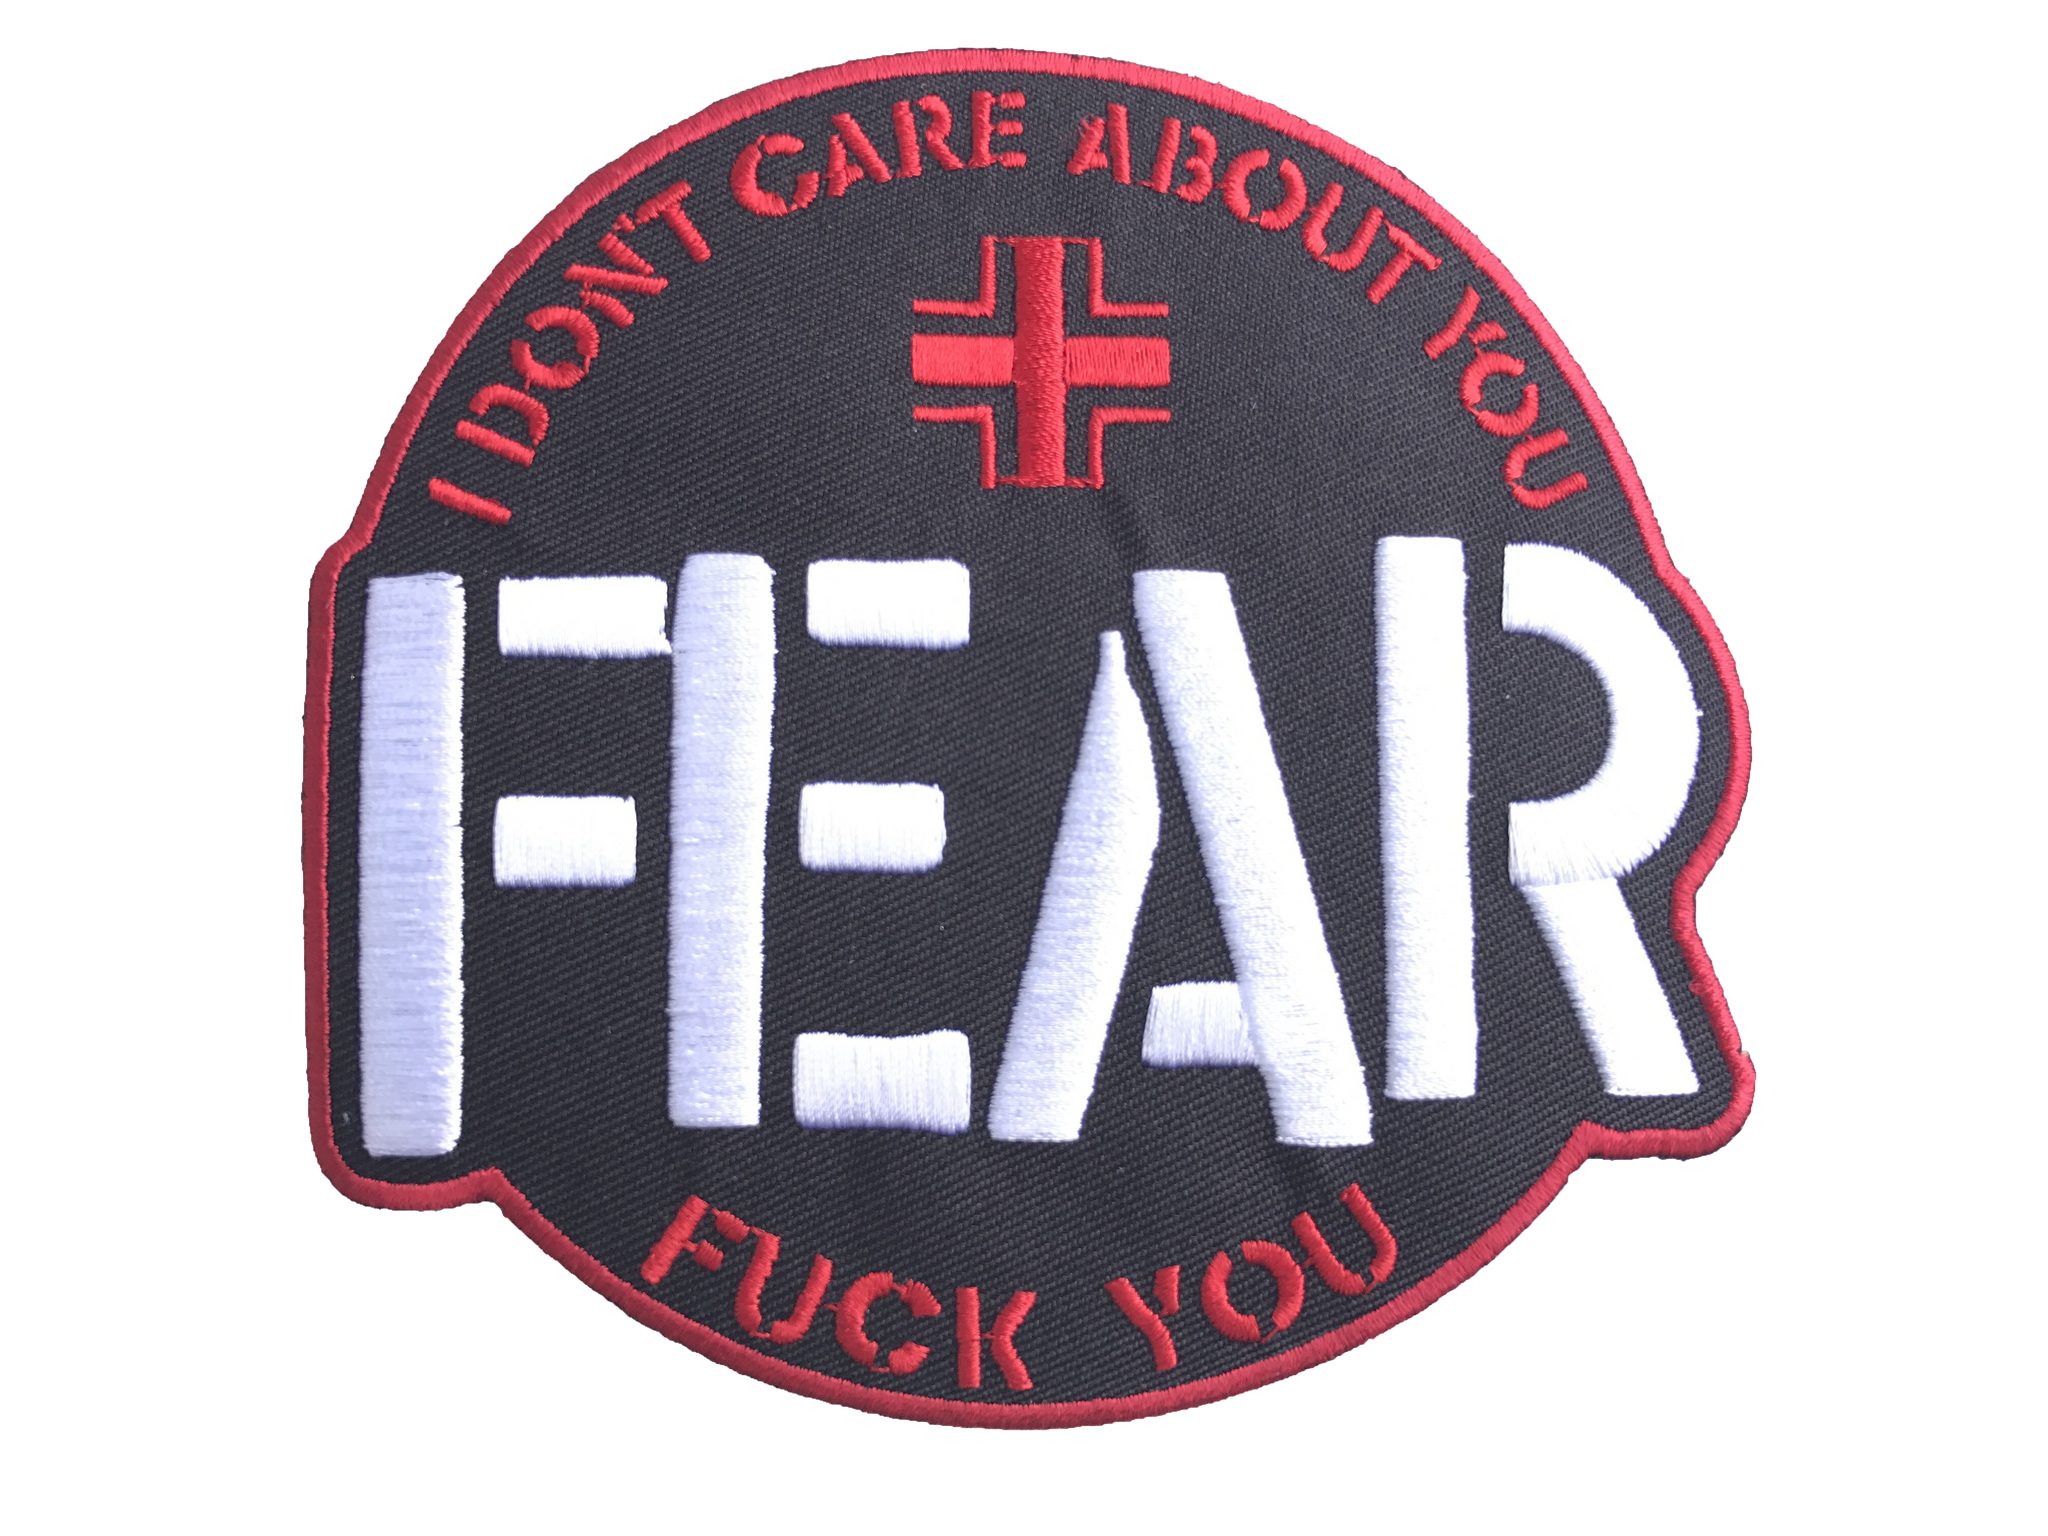 FEAR "I DON'T CARE ABOUT YOU" EMBROIDERED PATCH